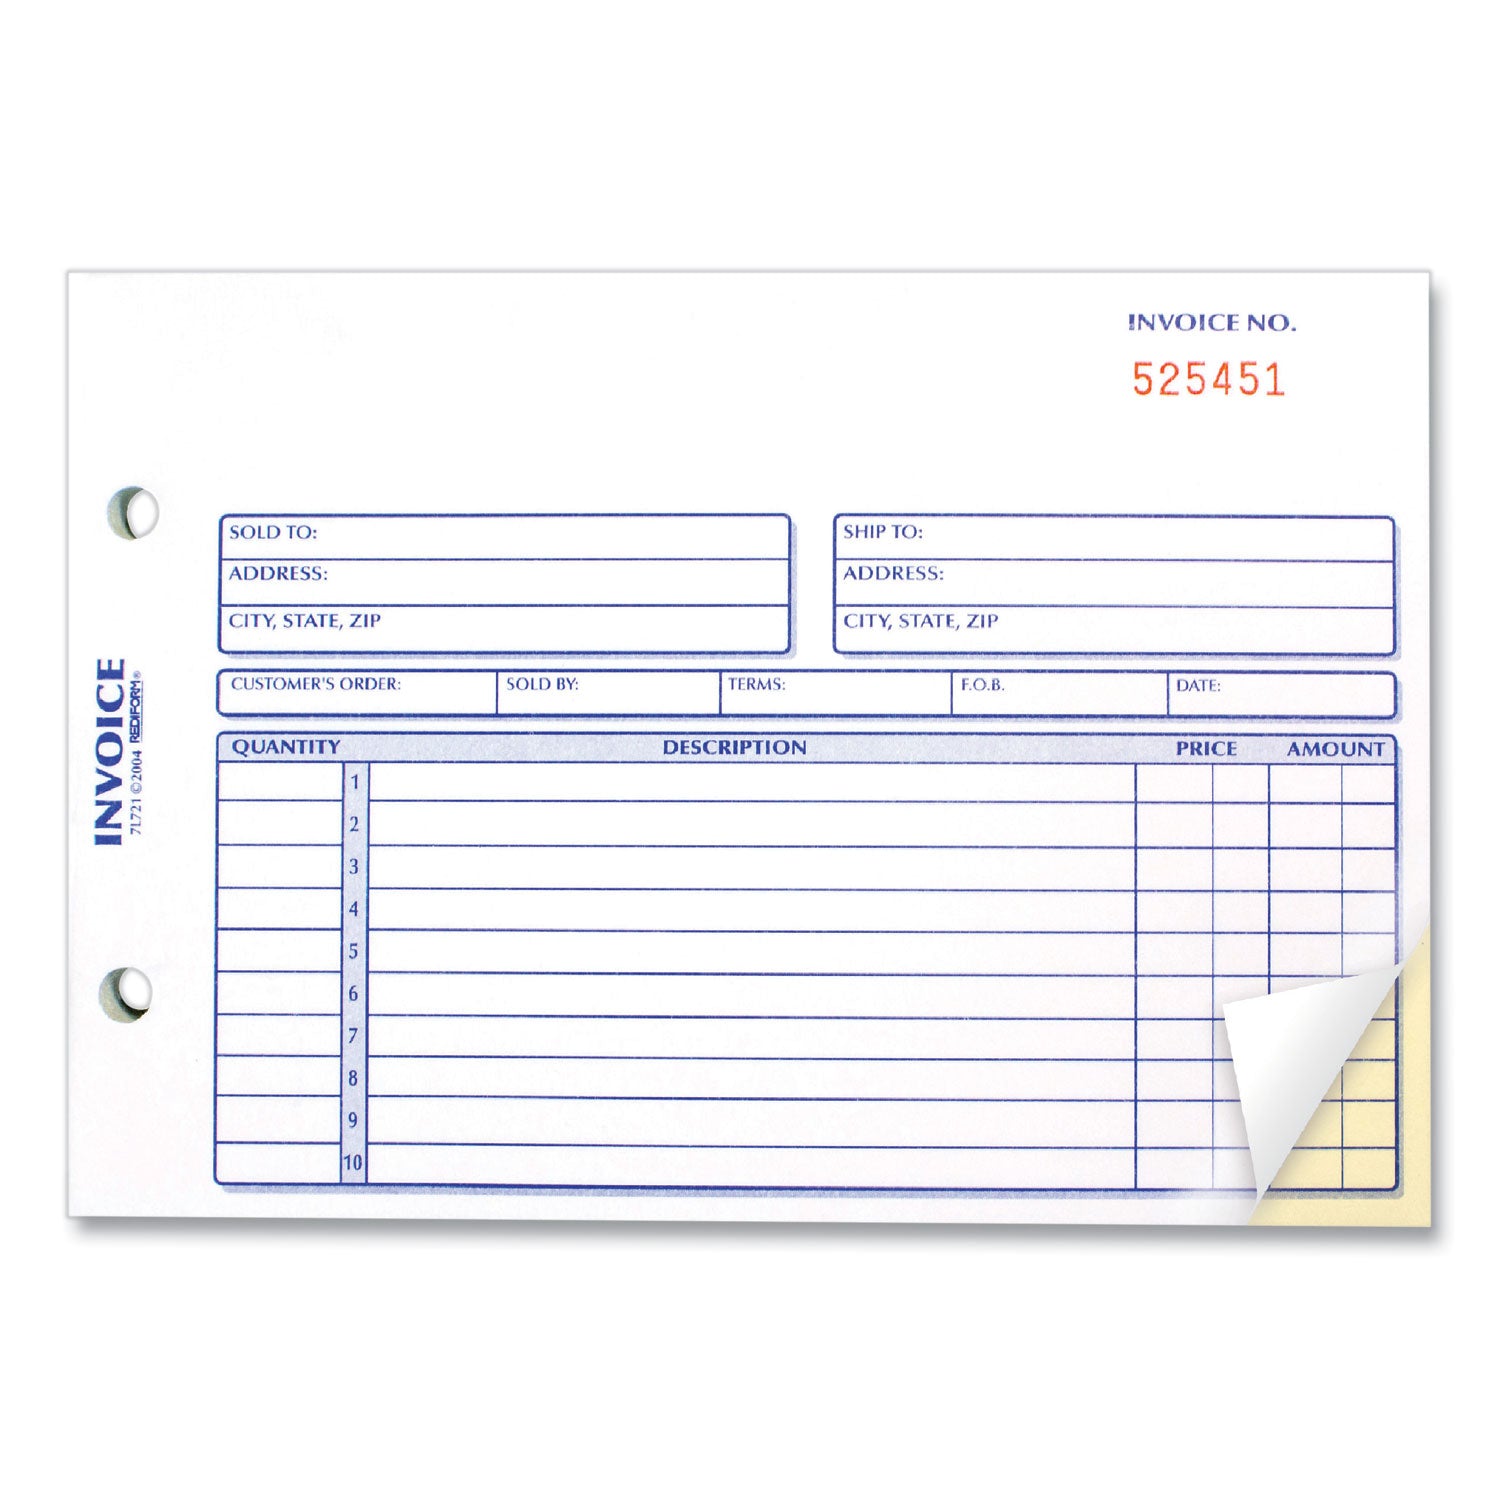 Invoice Book, Two-Part Carbonless, 5.5 x 7.88, 50 Forms Total - 